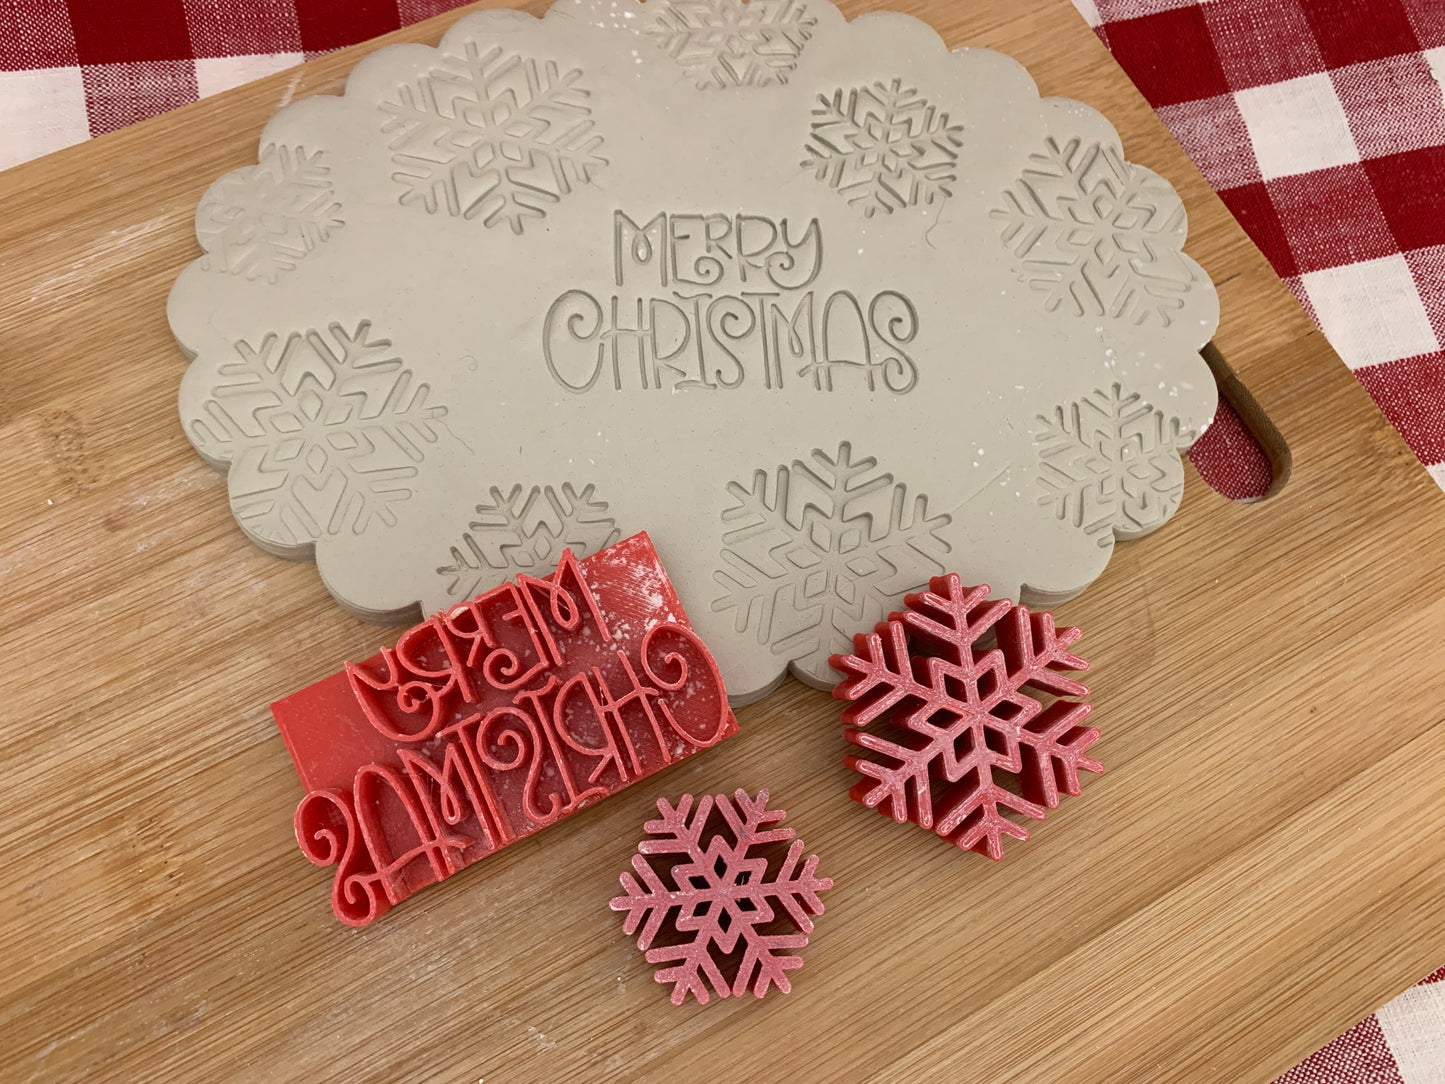 Christmas casual "Merry Christmas" word stamp - plastic 3D printed, multiple sizes